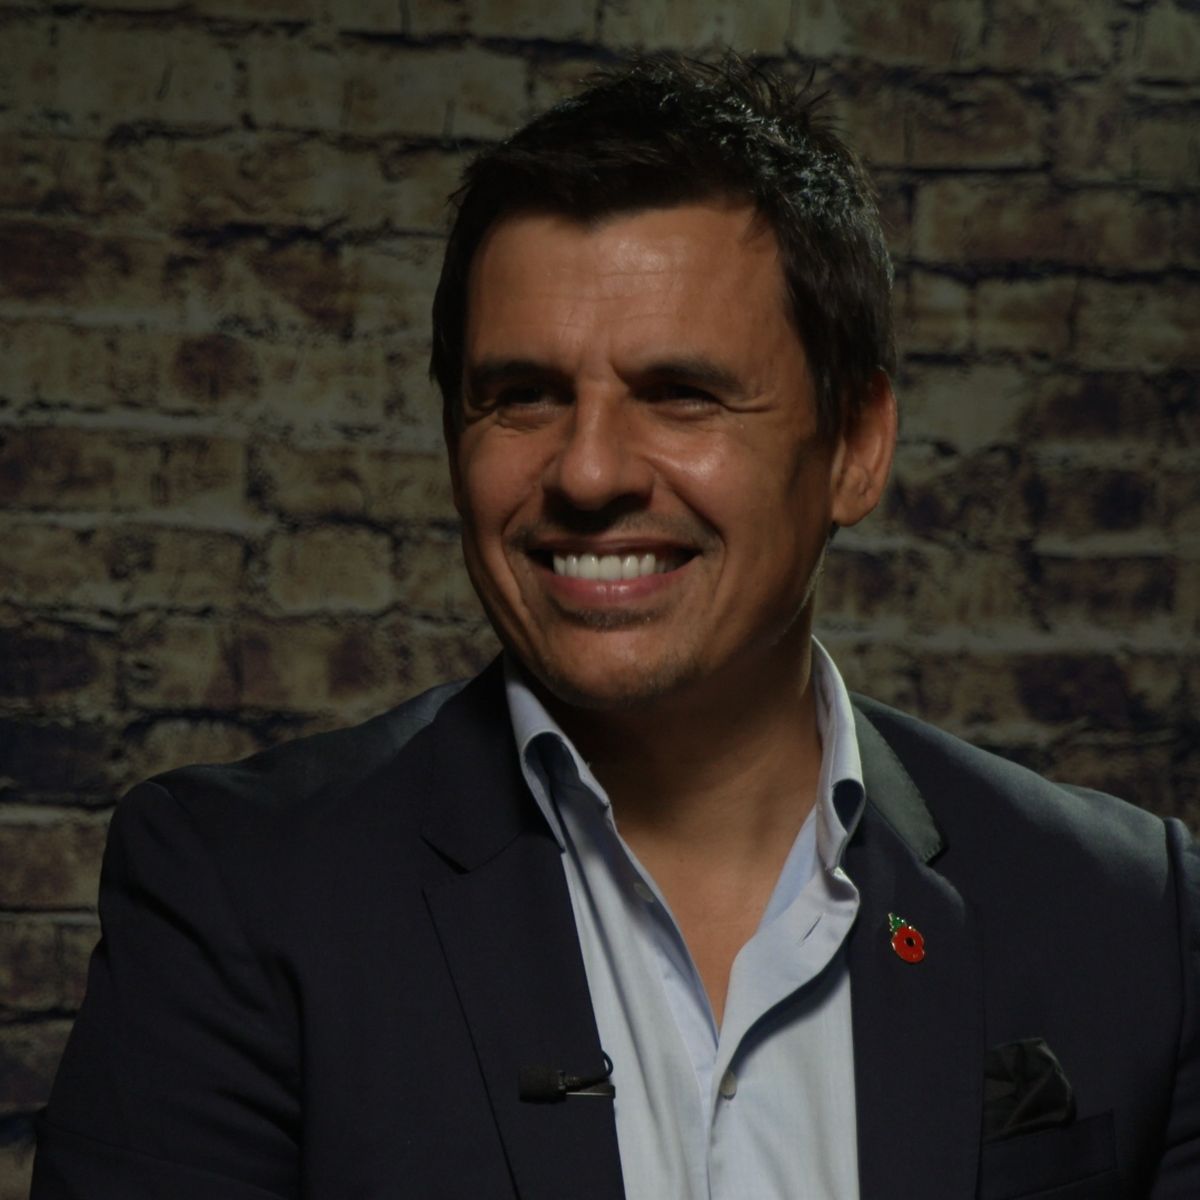 Chris Coleman One Of The Most Influential Men On The Football Career